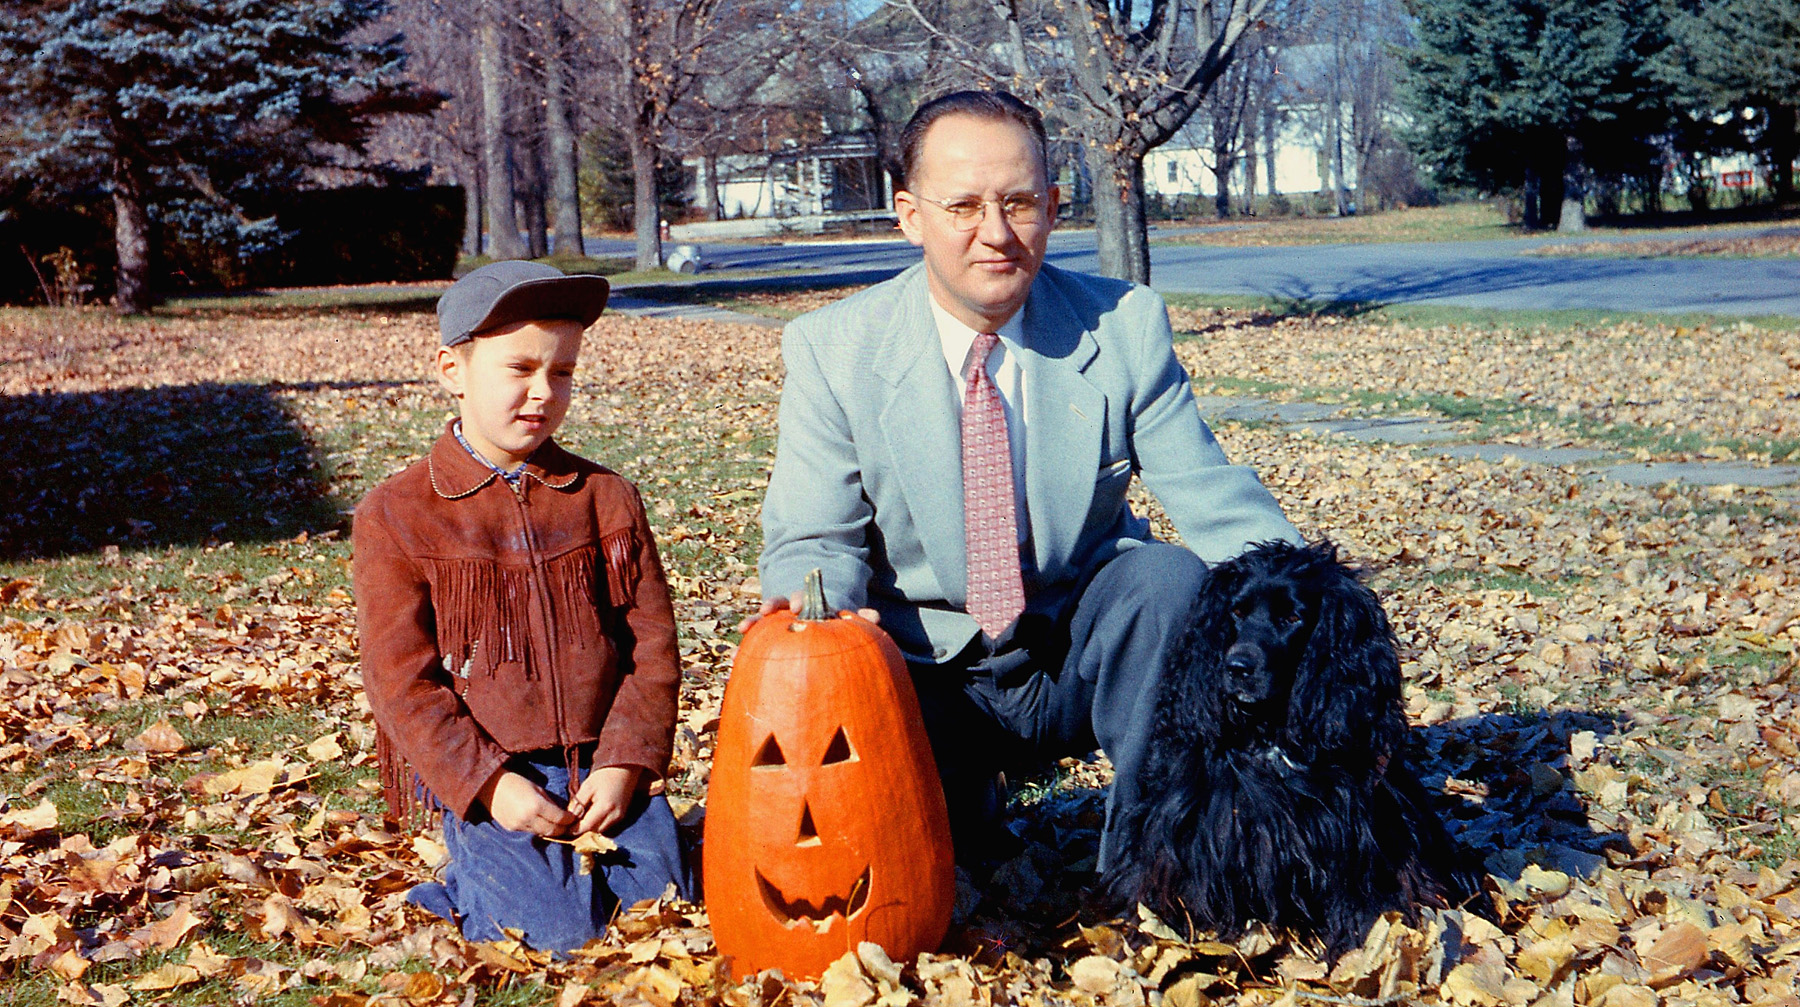 This is me, my dad, our cocker spaniel Cyndy and Dad's huge pumpkin. Bedford, Quebec, 1958. View full size.